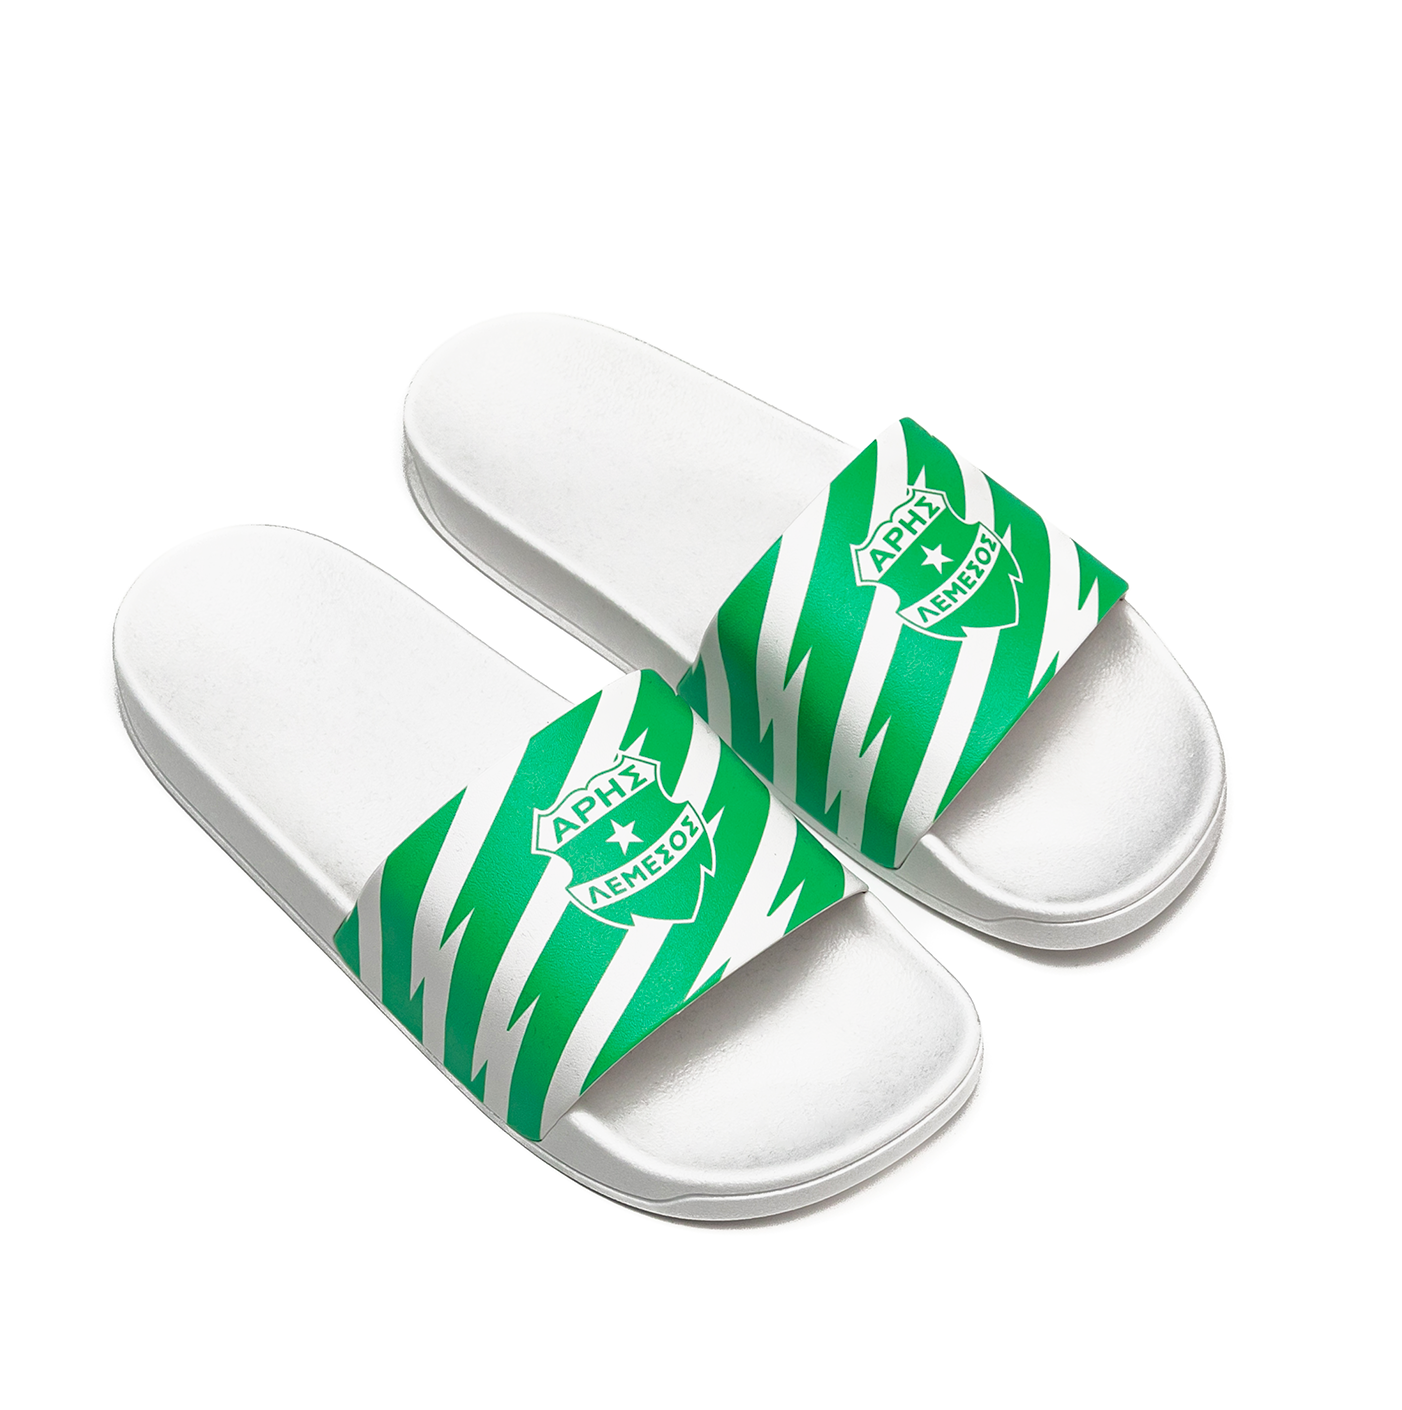 ARIS FC RUBBER SLIPPERS